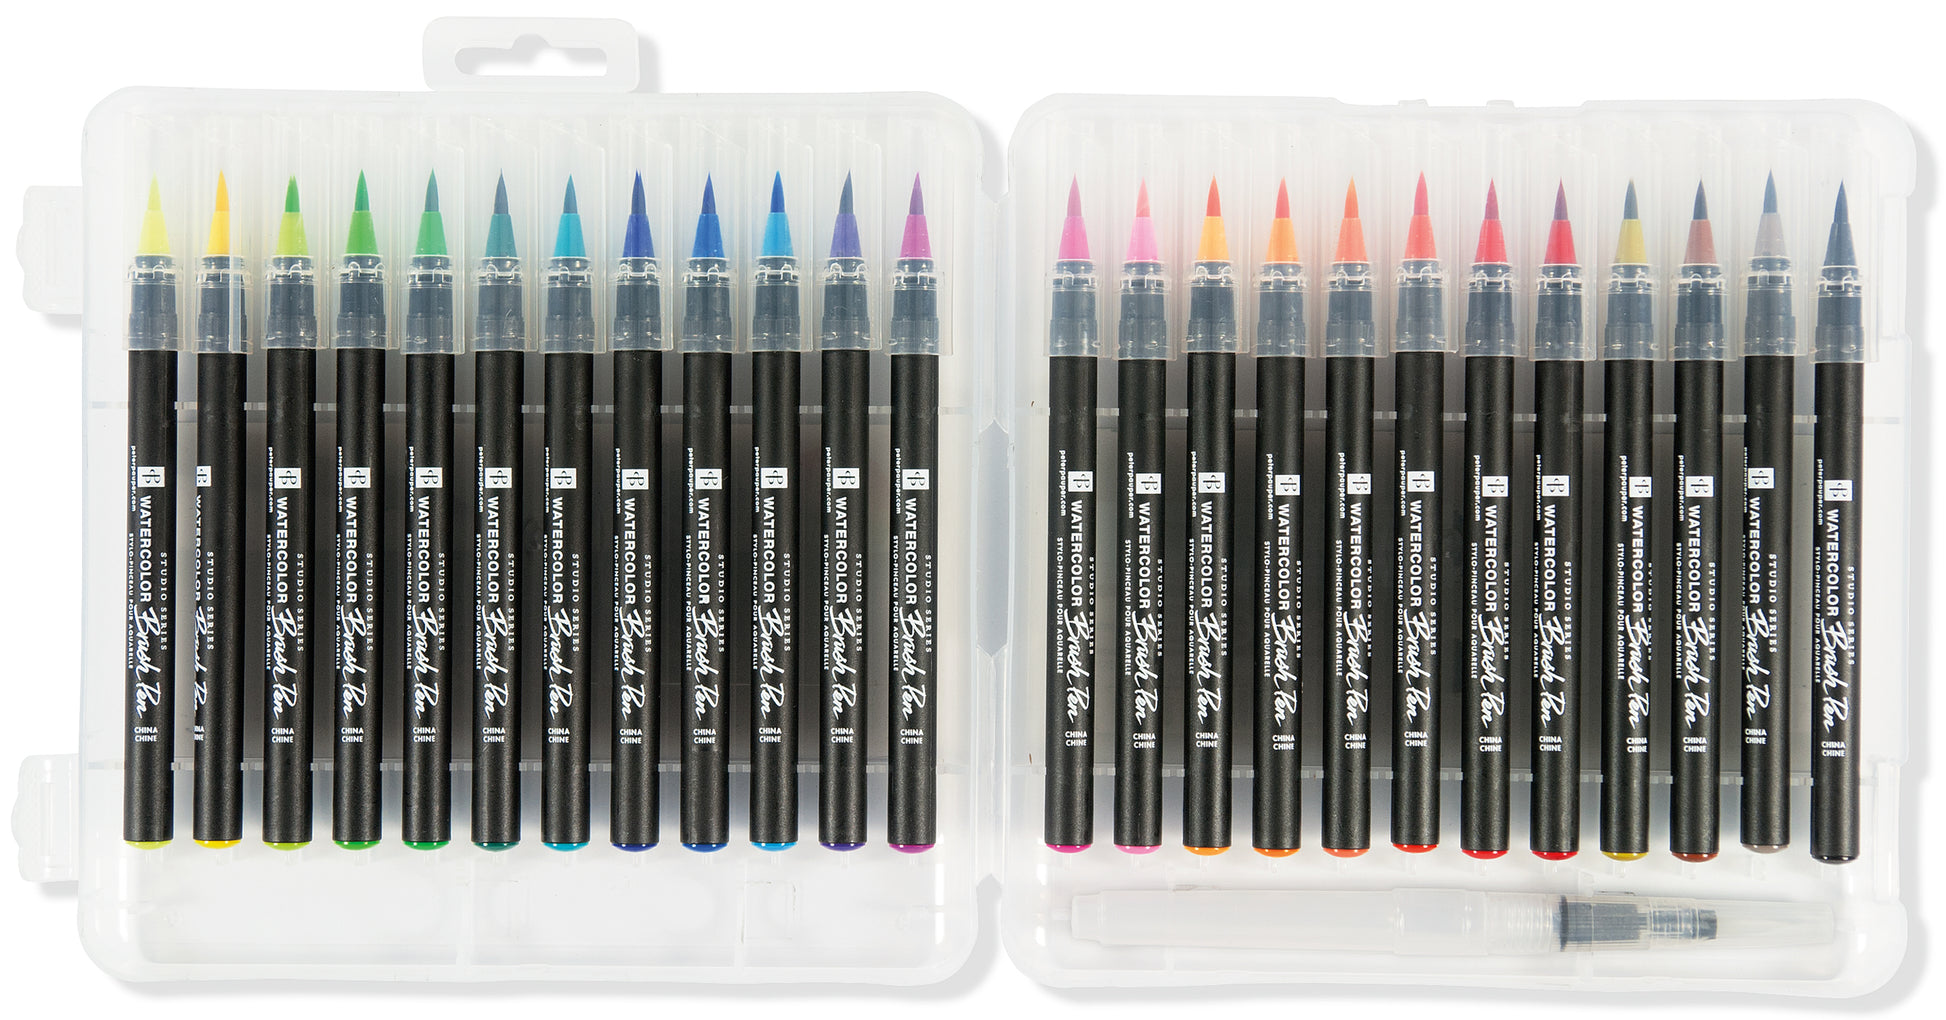 studio series watercolor brush pens gorgeous watercolor effect bristle vivid colors colorful blend water brush painting brush lettering coloring sketching nylon bristle tips art artists stationary pen paint artists creativity color colouring